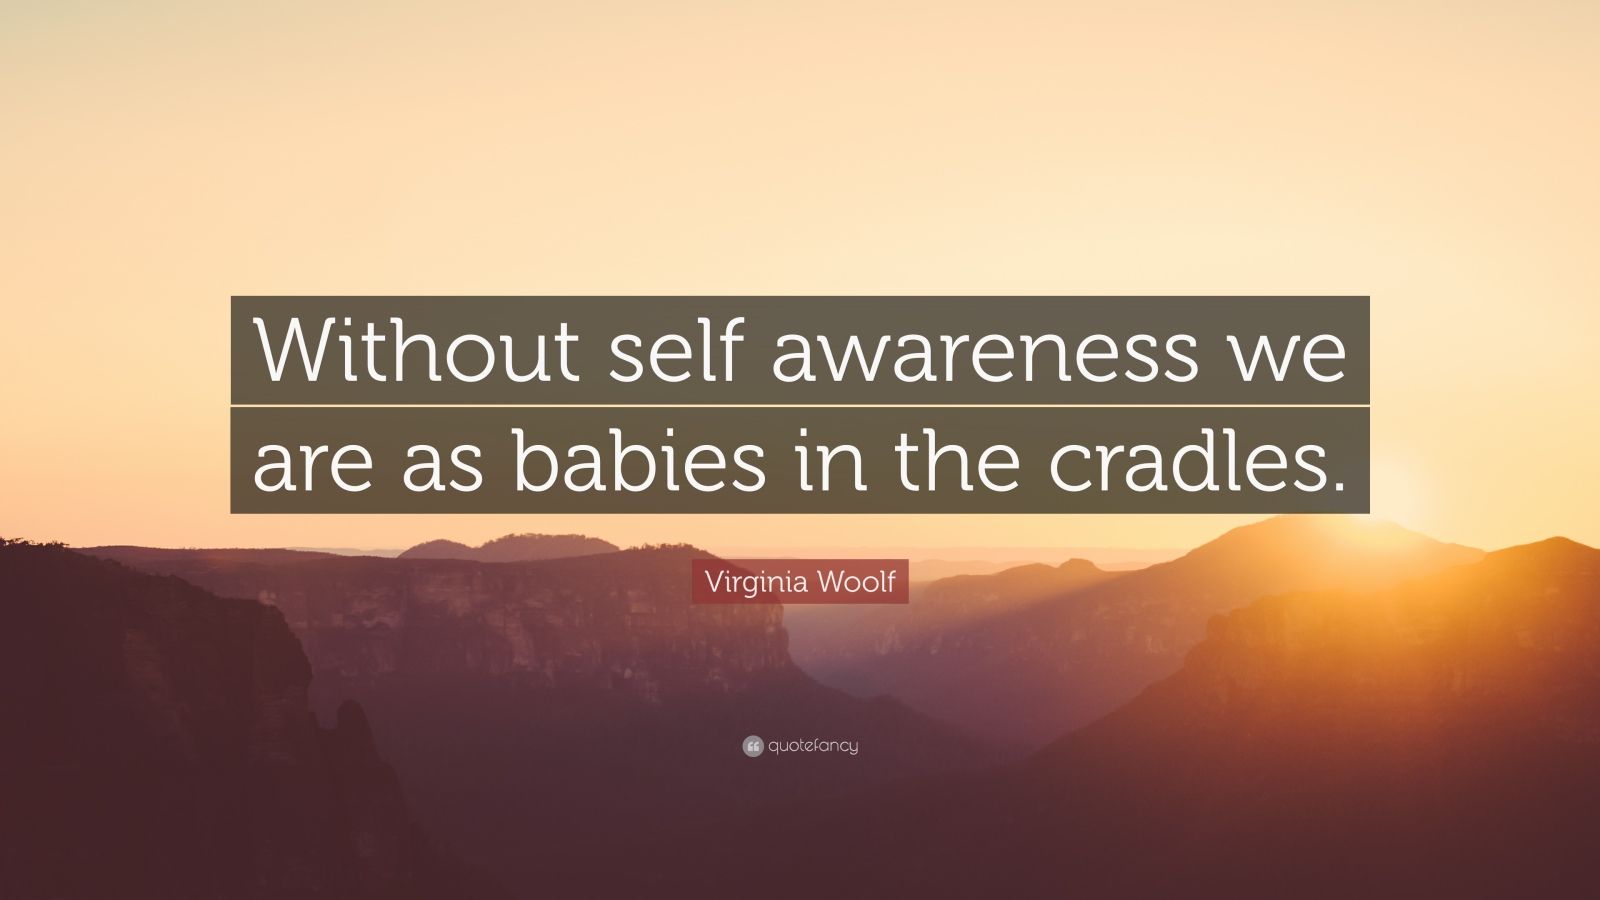 Virginia Woolf Quote Without Self Awareness We Are As Babies In The Cradles